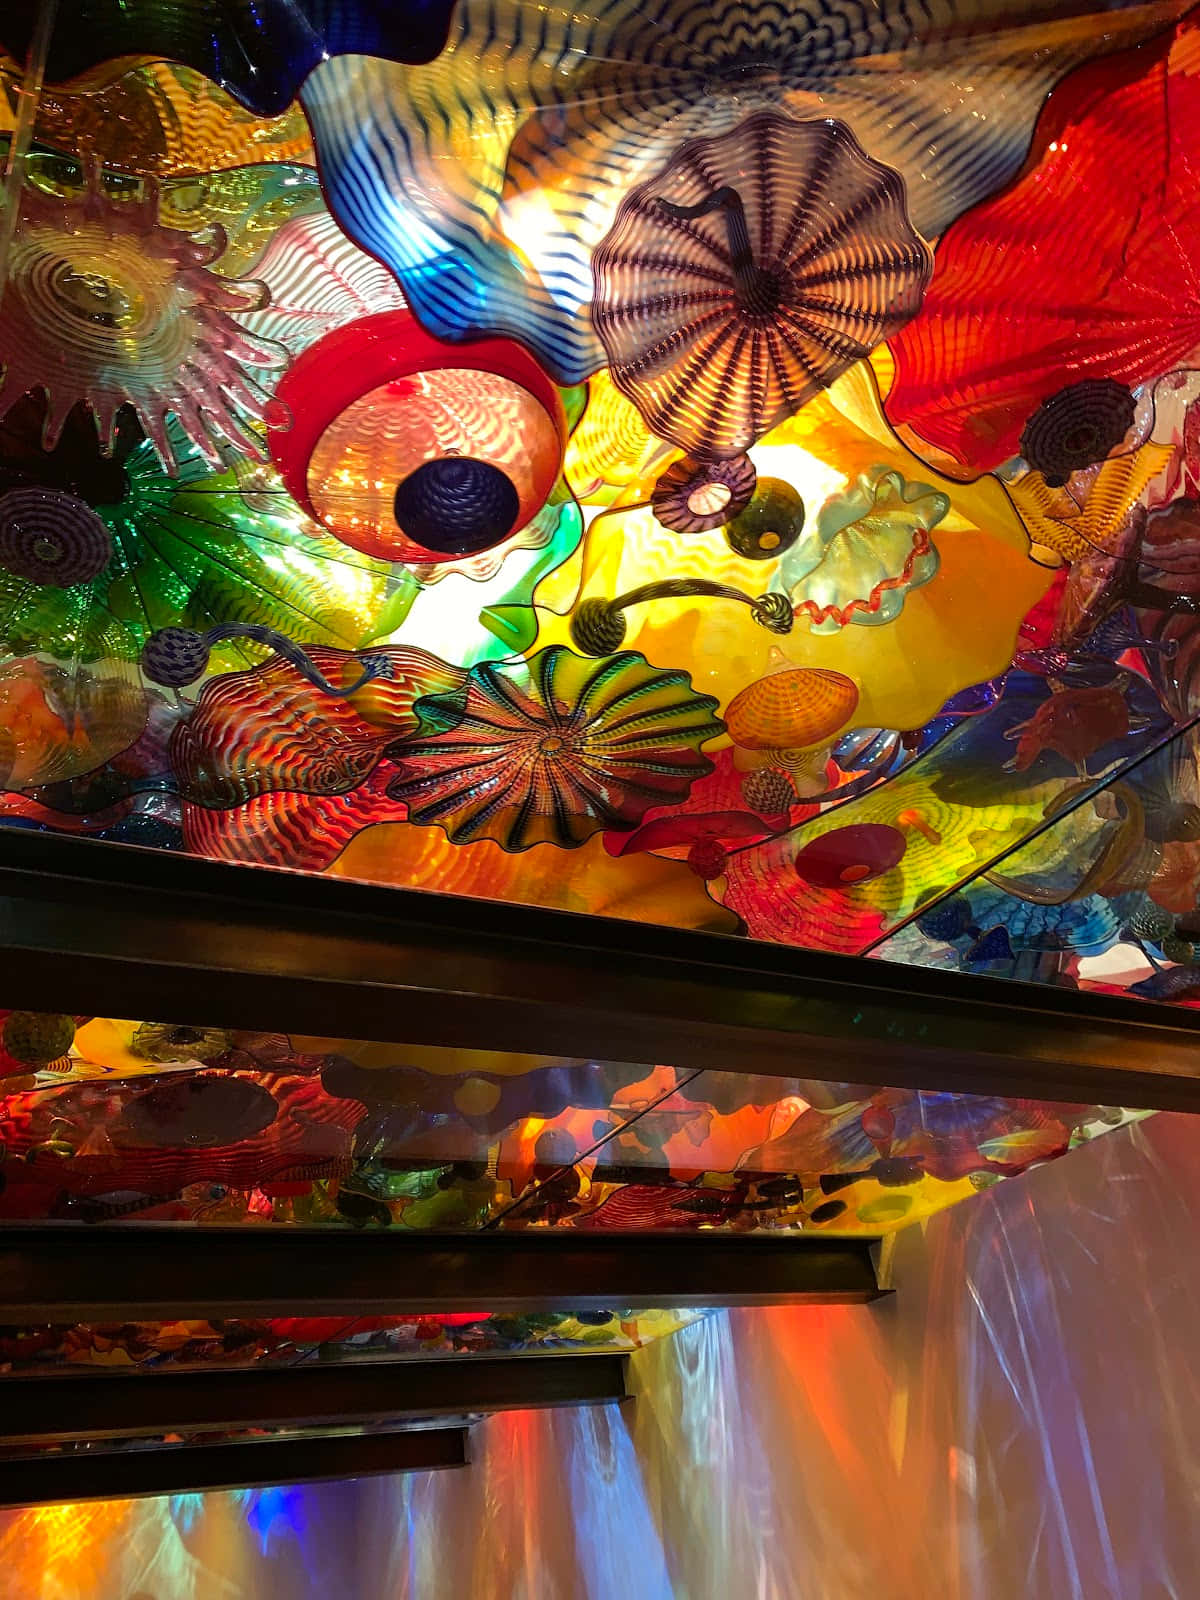 Chihuly Glass Ceiling Artwork Wallpaper